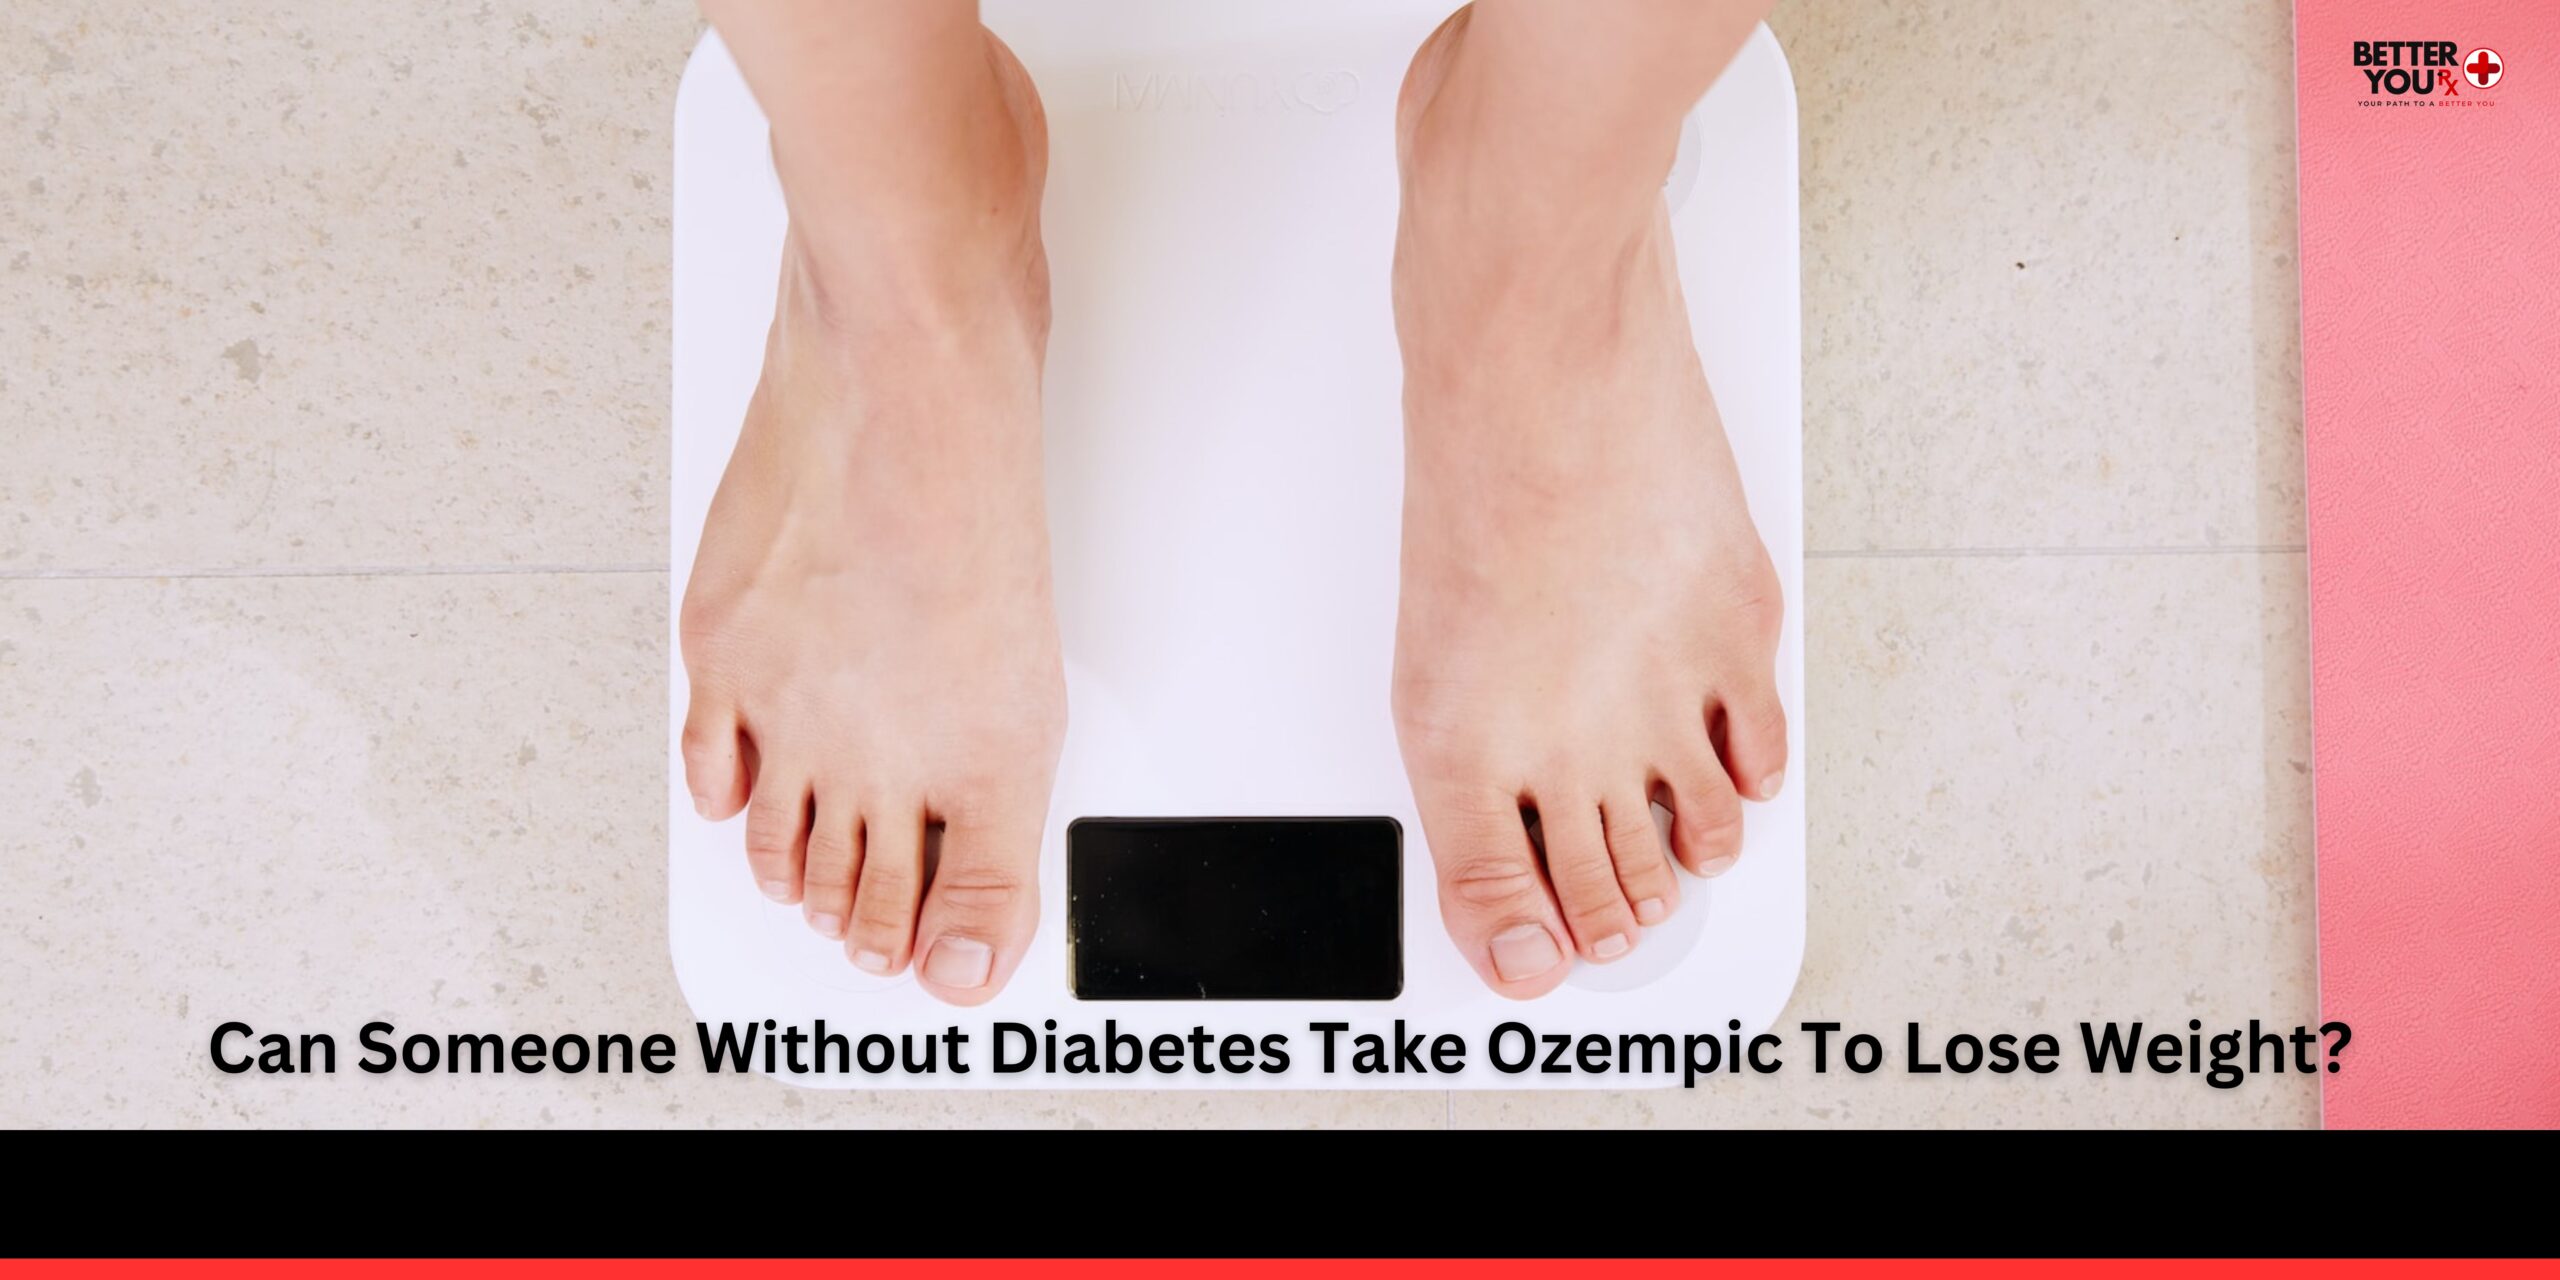 Can Someone Without Diabetes Take Ozempic To Lose Weight?